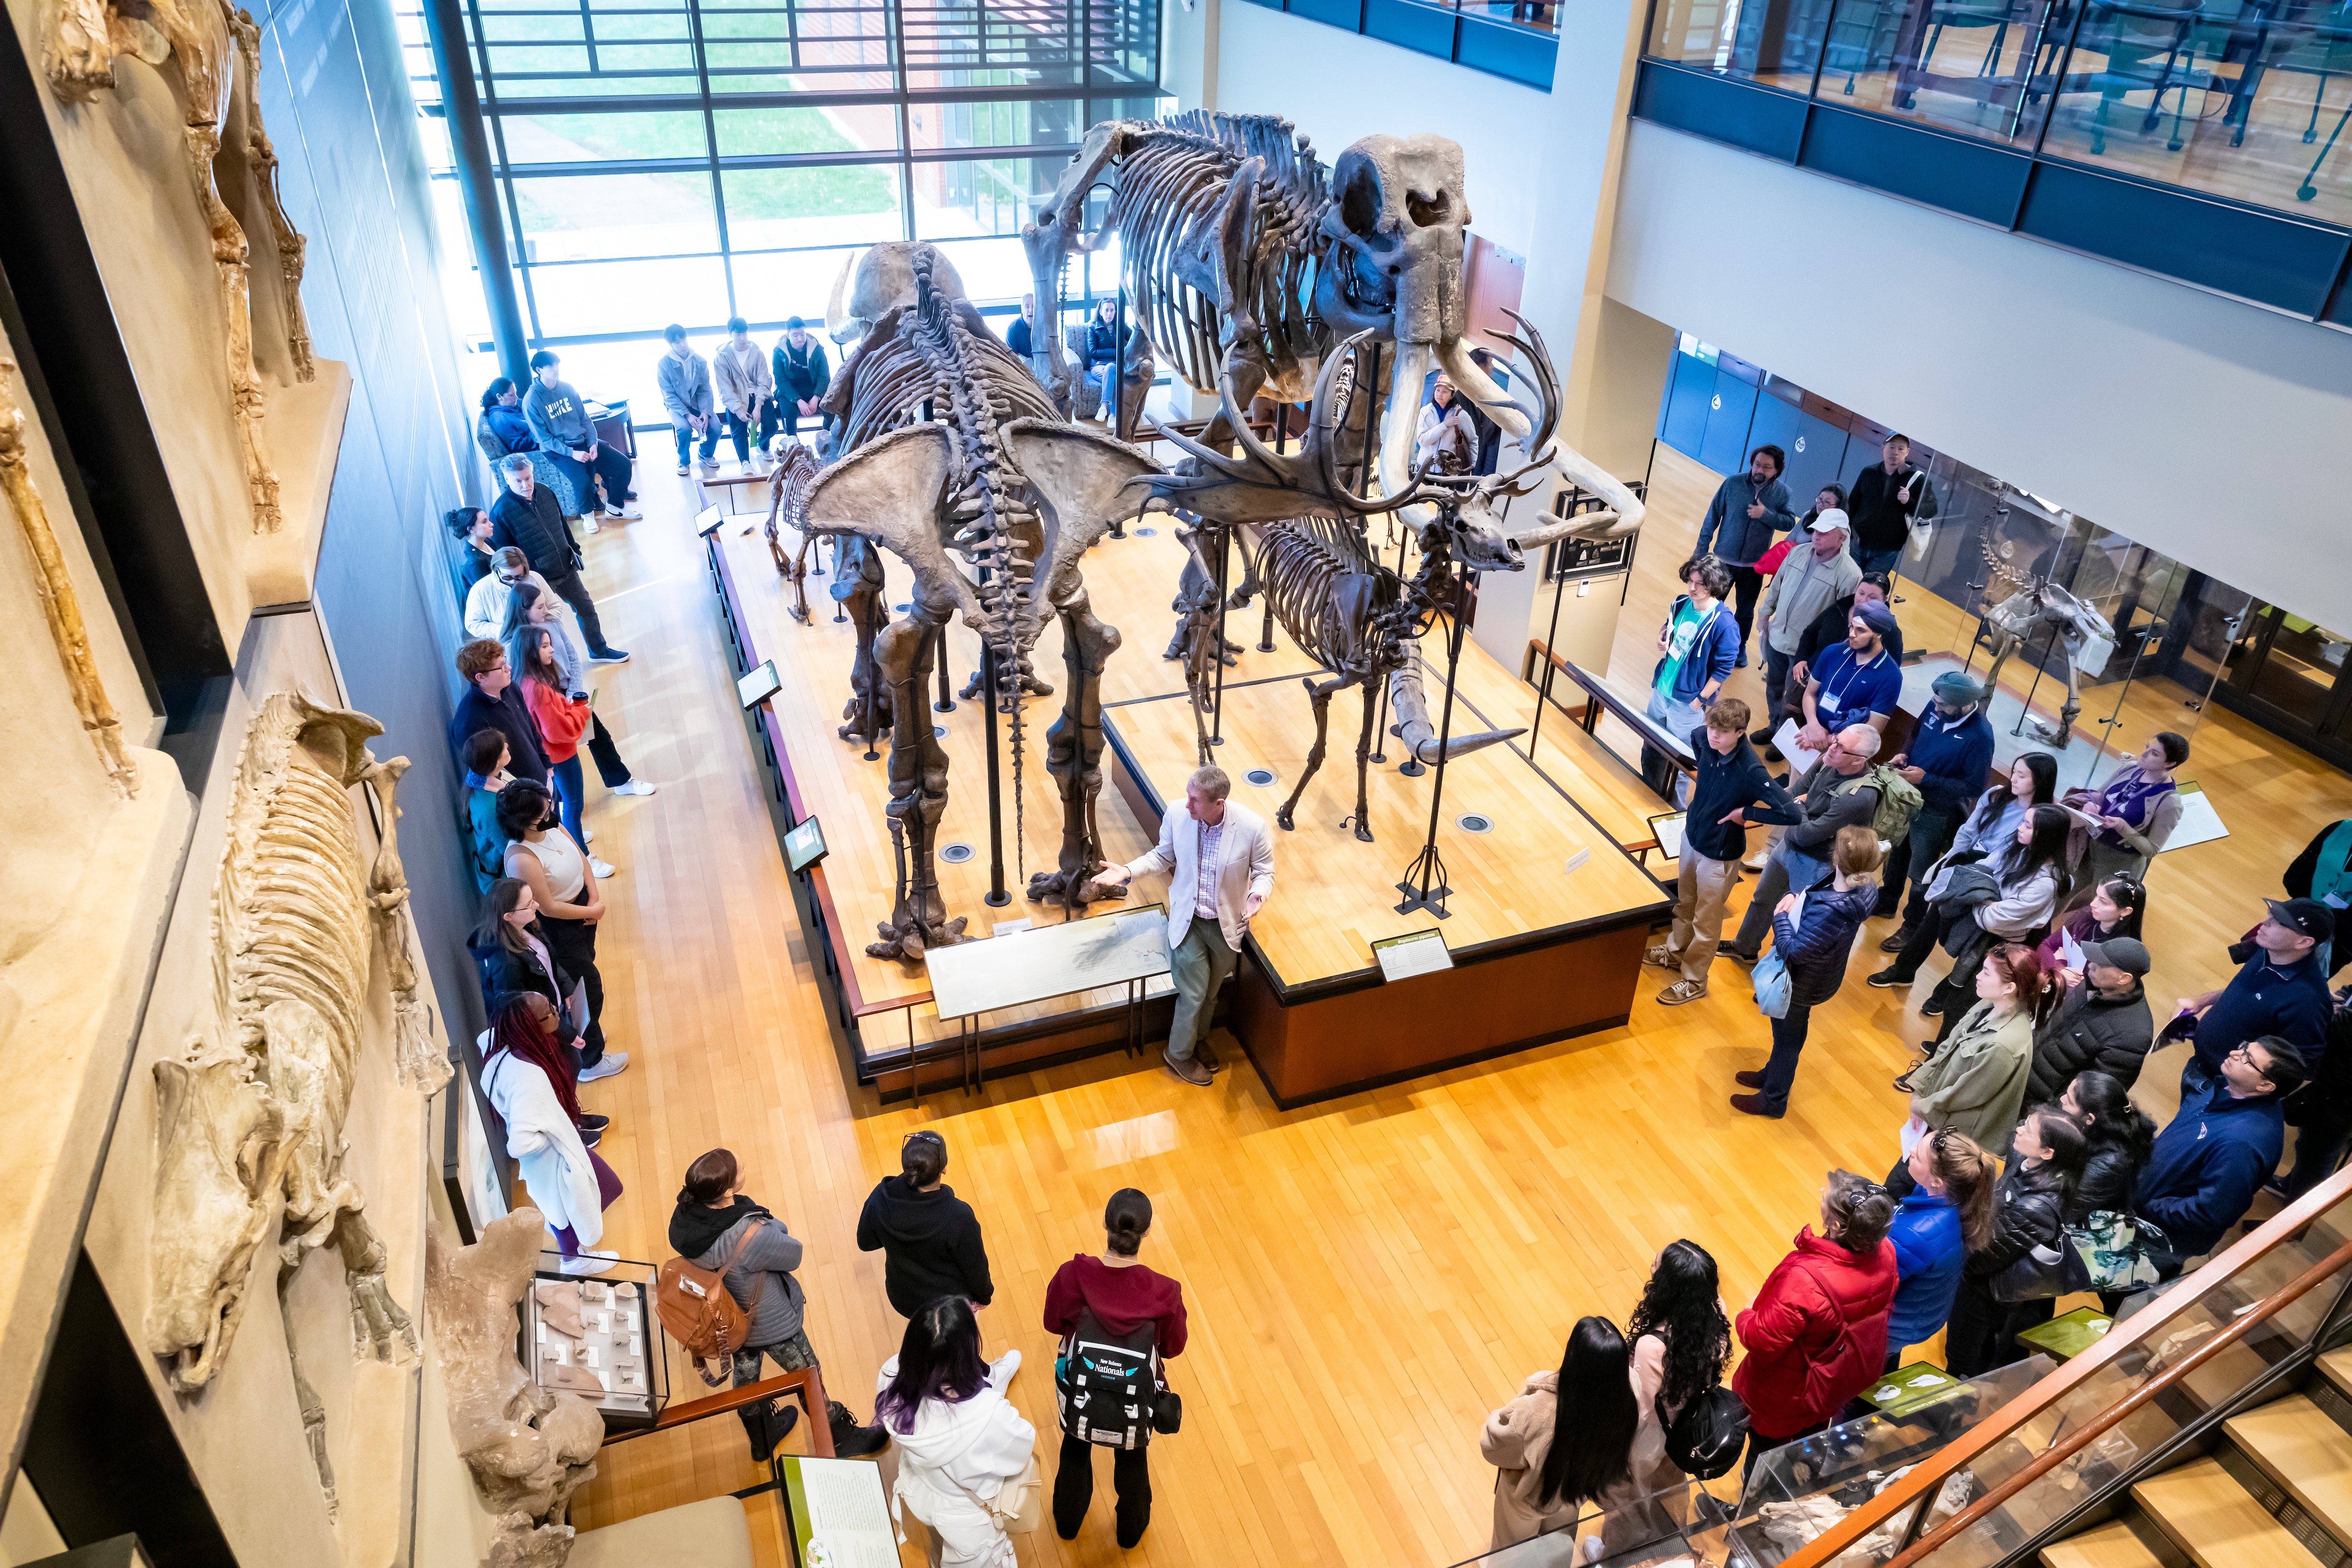 People gather around a display of a mammoth skeleton in the Beneski Museum of Natural History at Amherst College.